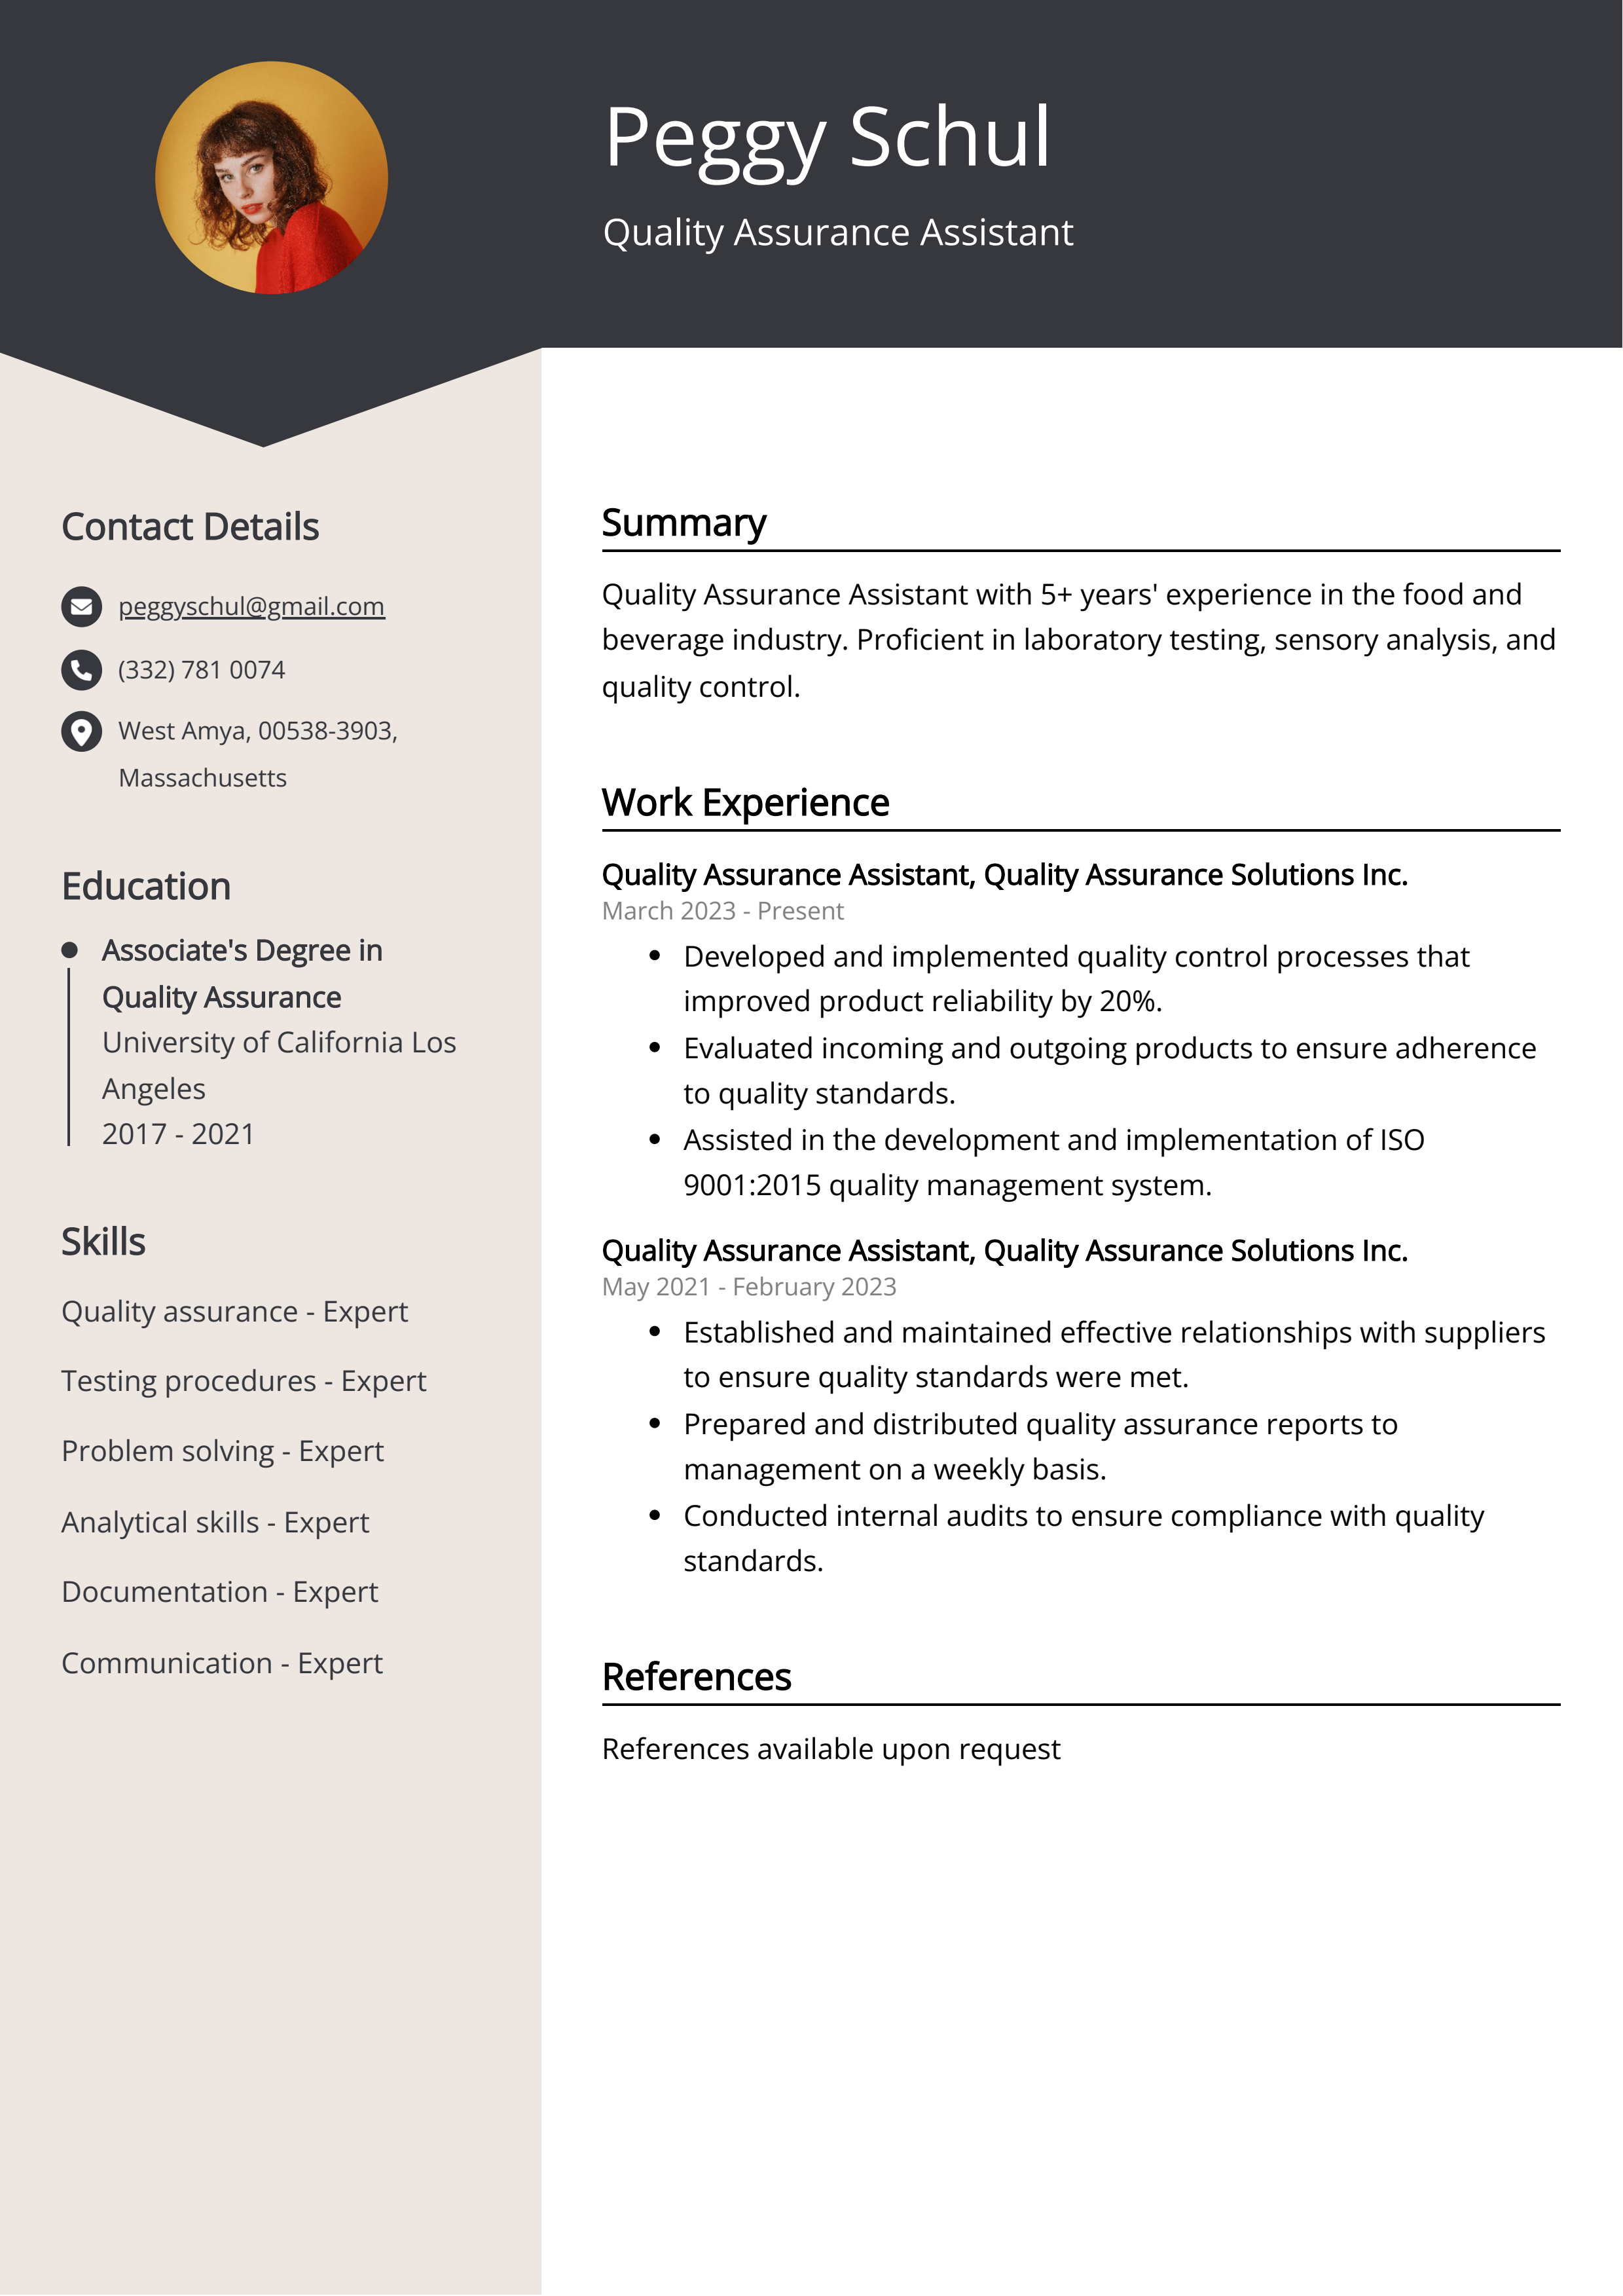 Quality Assurance Assistant CV Example